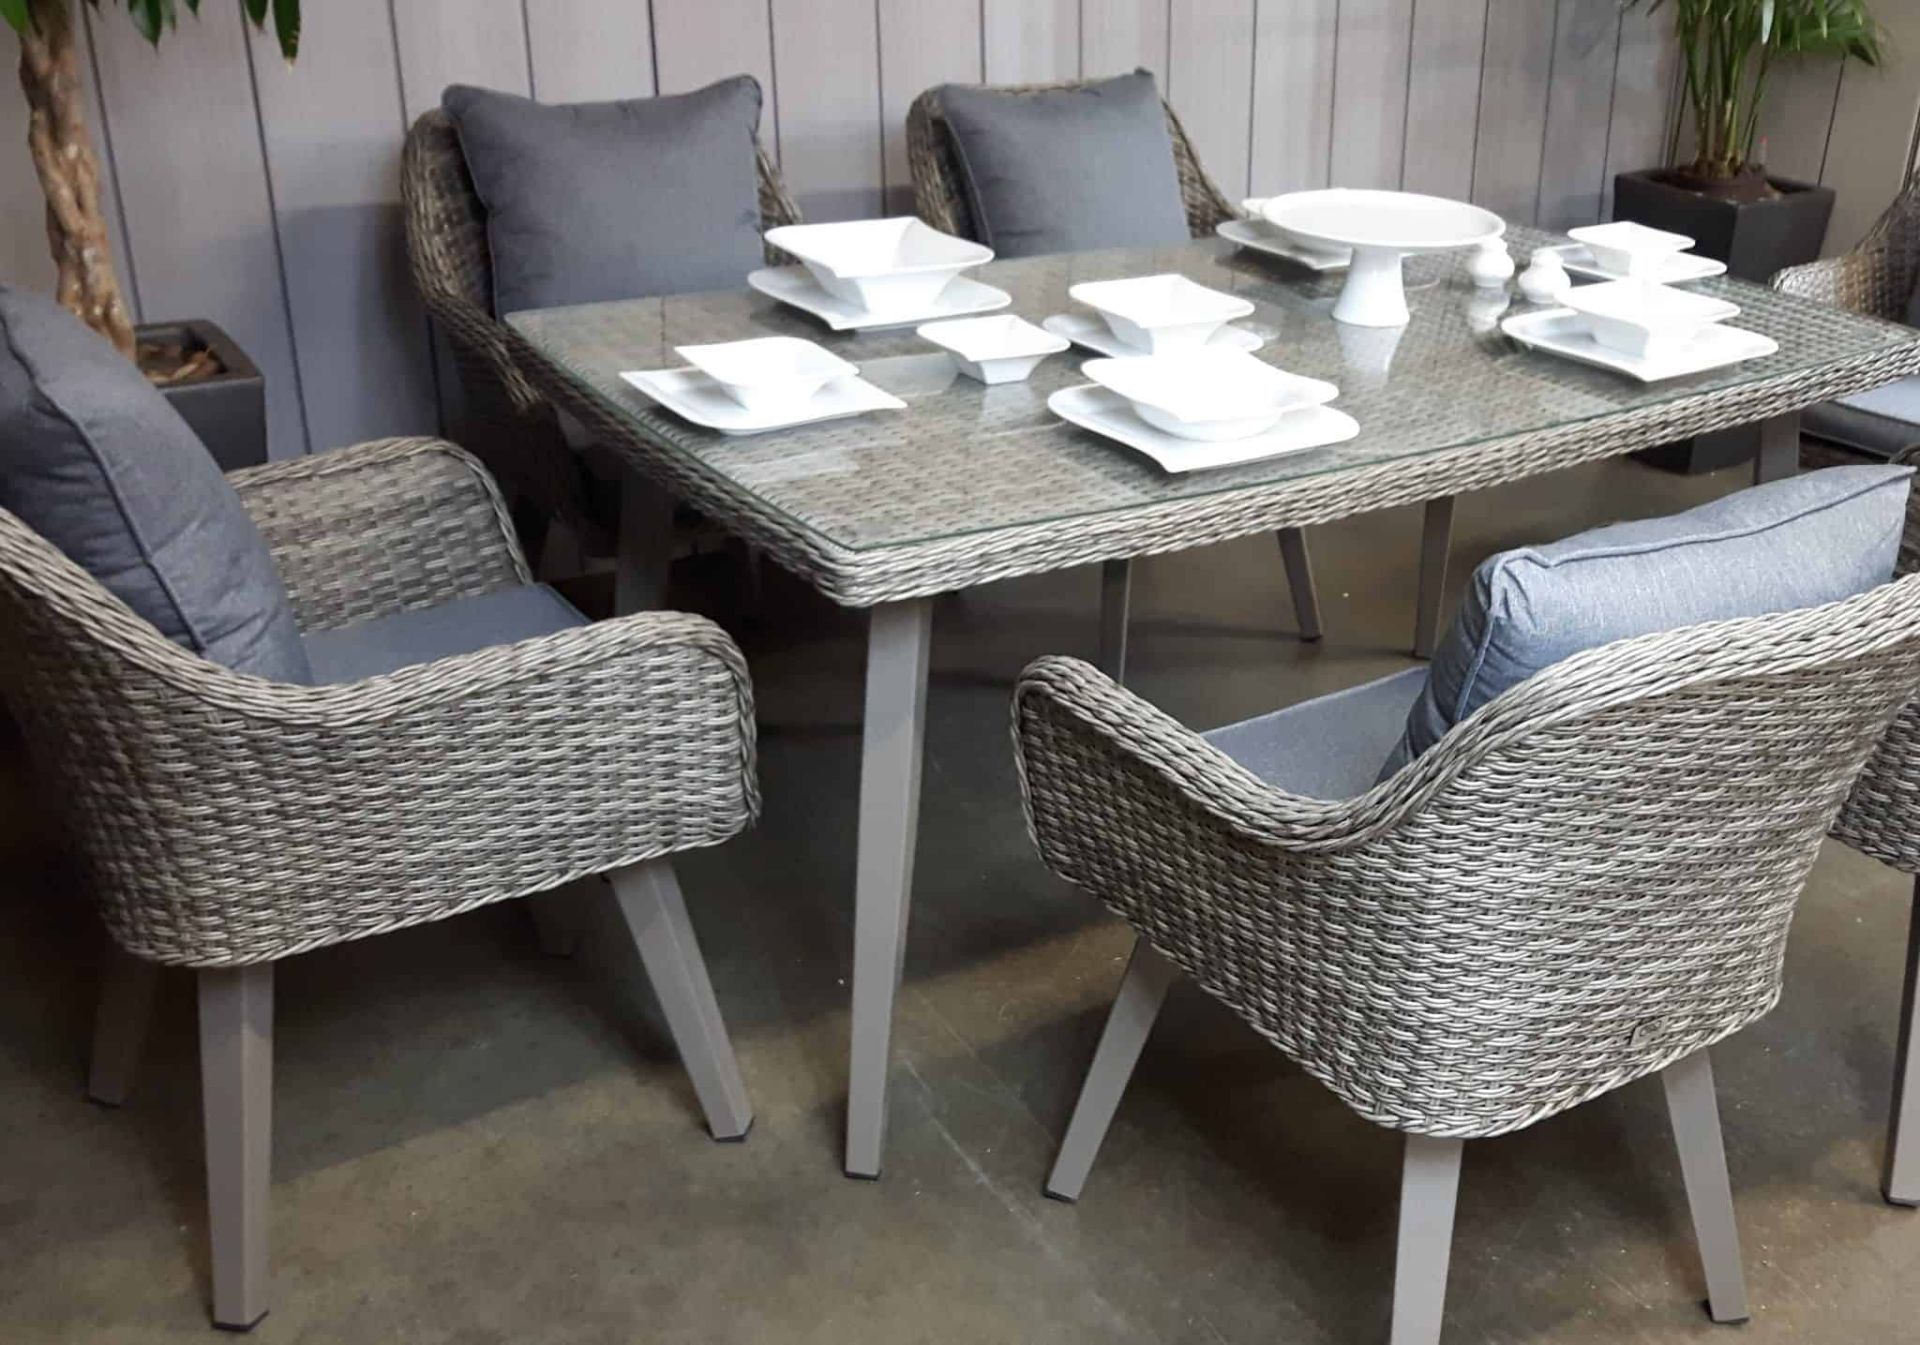 NEW 2019 Hardingham 7 Piece Contemporary All Weather Dining Set - Image 5 of 7